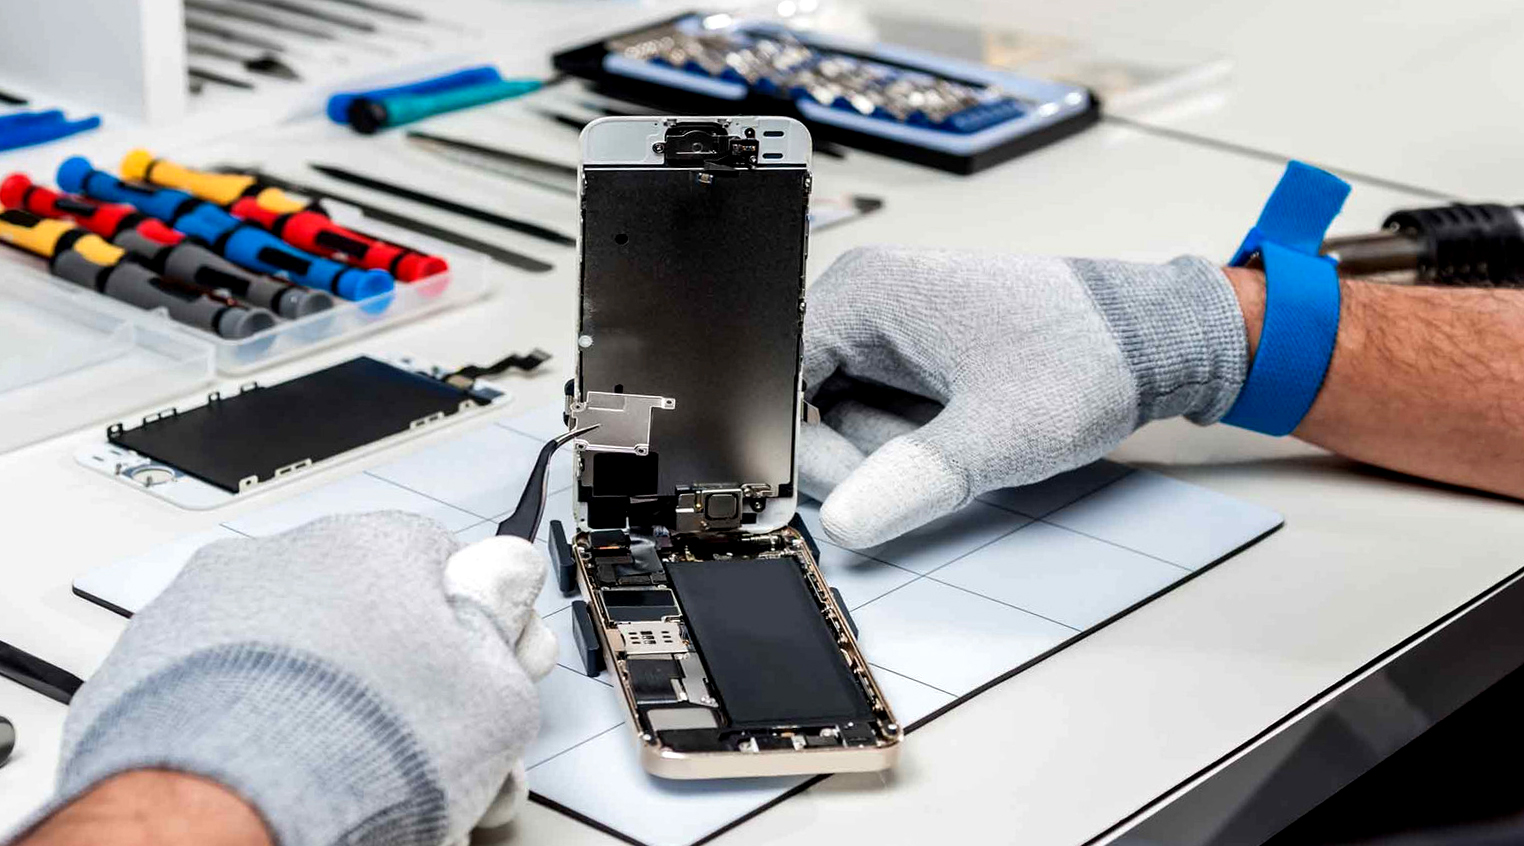 The European Commission wants to oblige smartphone manufacturers to increase battery life and produce spare parts within 5 years